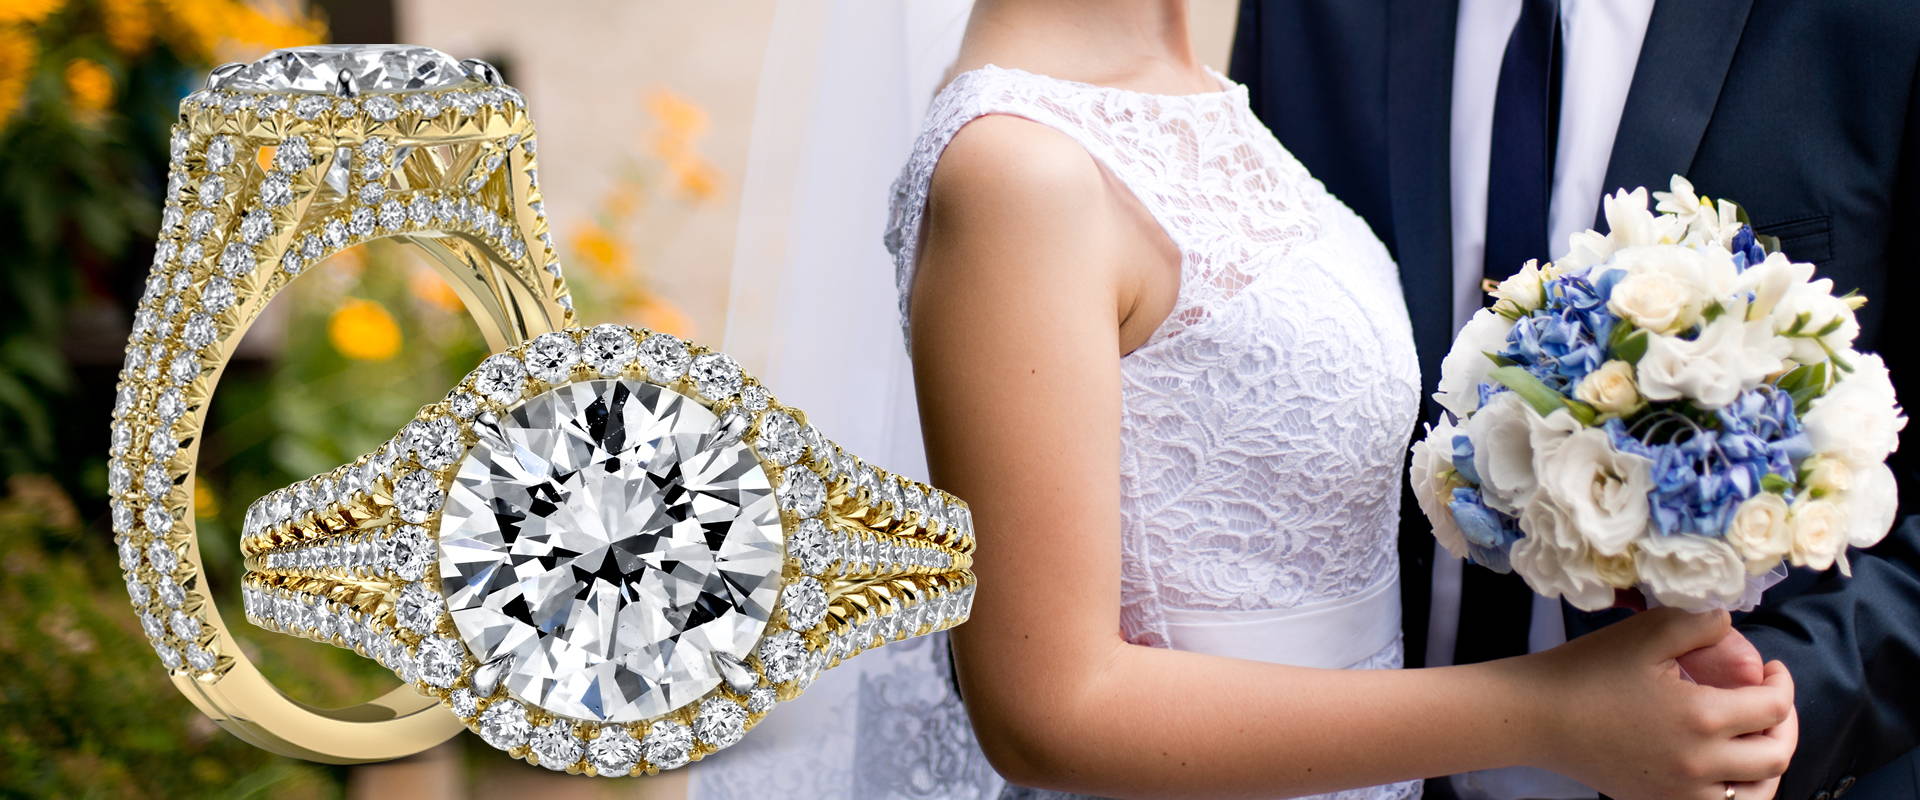 round brilliant cut diamond ring with married couple and bouquet of flowers